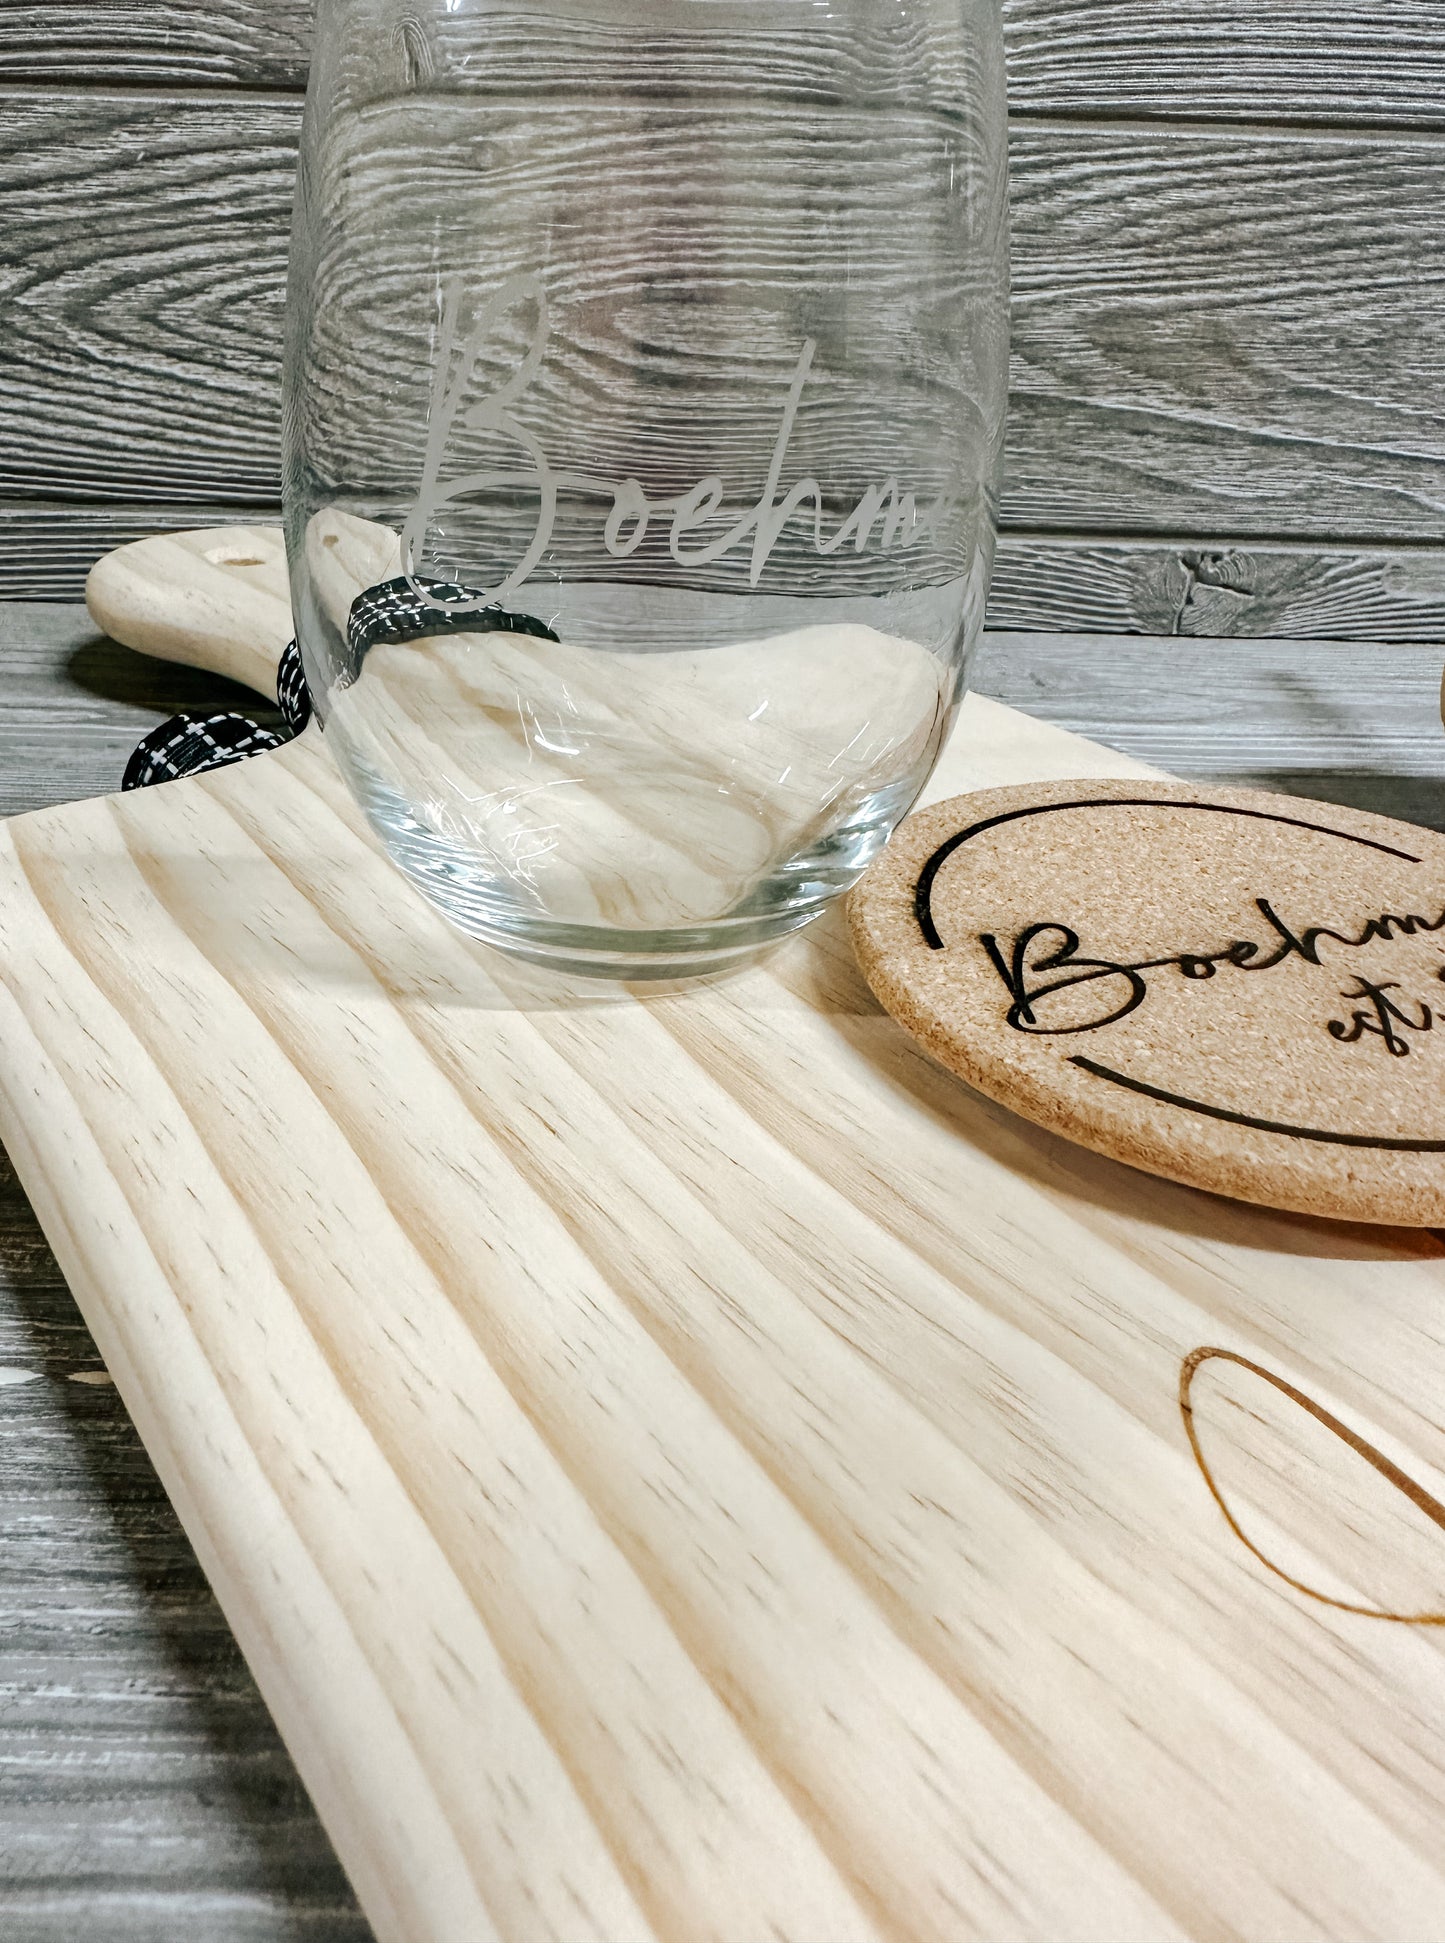 Wedding gift, Charcuterie board, Gift for newlyweds, House Warming, Personalized cutting board, etched wine glass